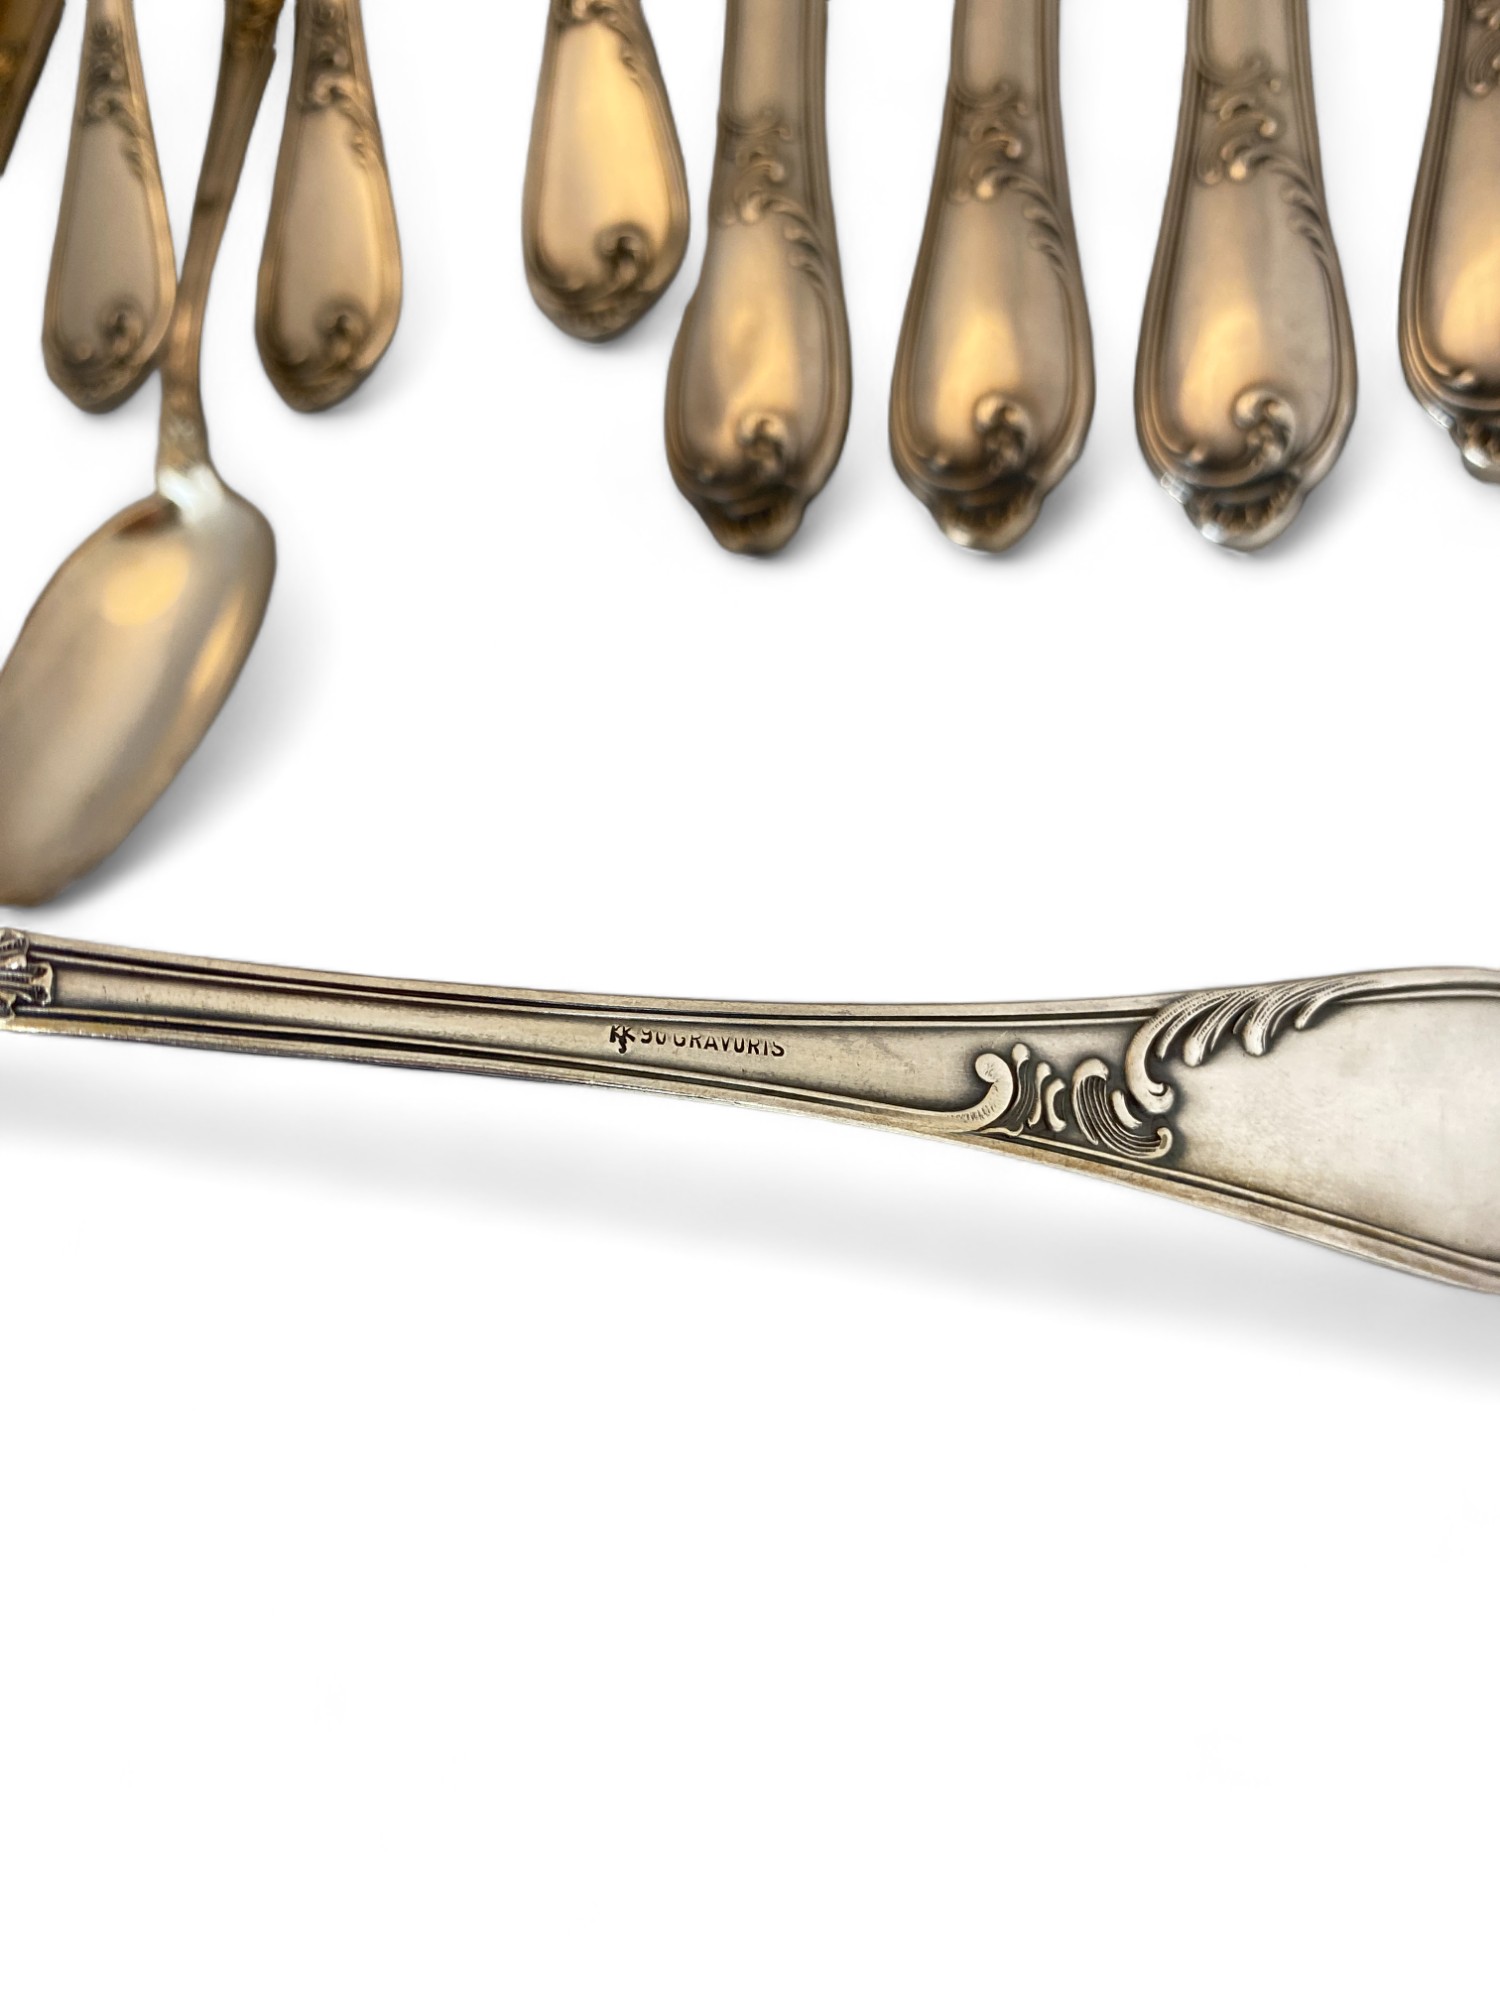 An extensive composite canteen of mostly silver plated Marly pattern cutlery by Christofle, Paris - Image 8 of 99